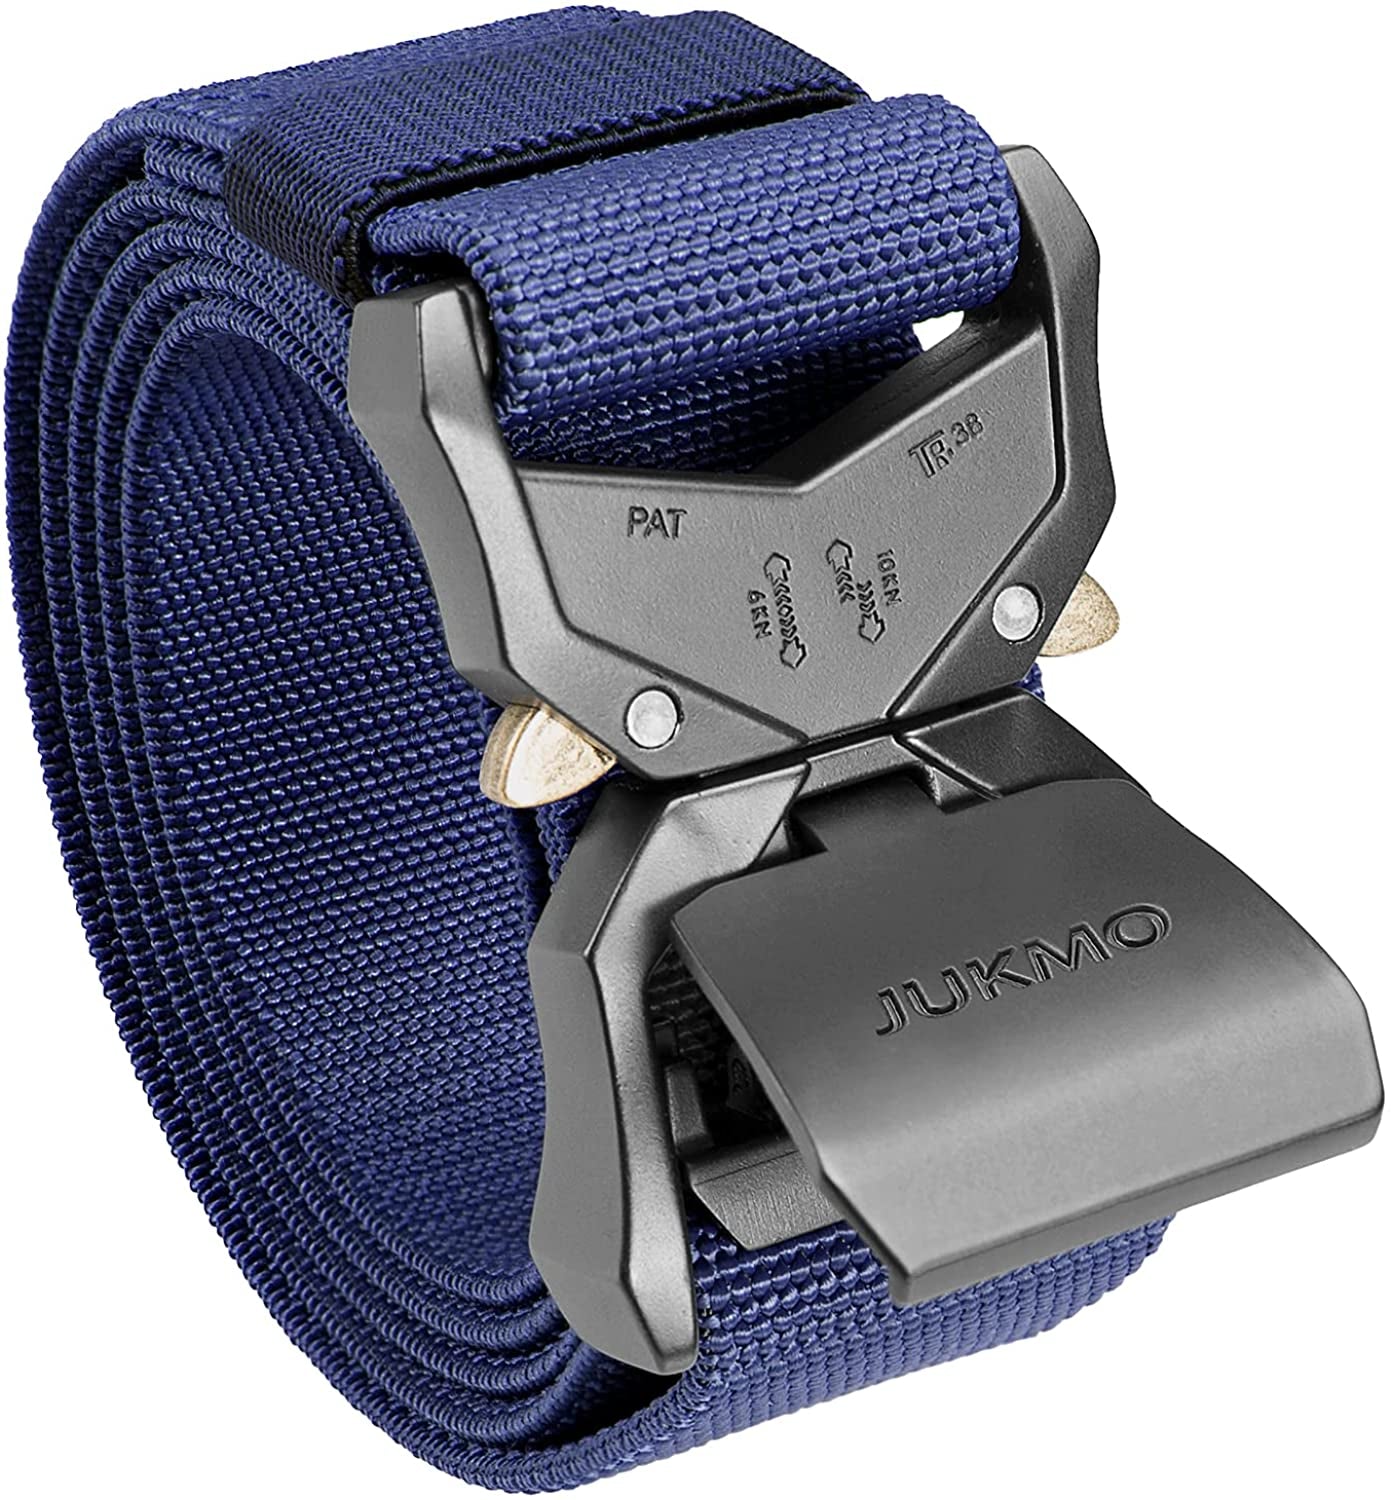 JUKMO Tactical Belt, Military Hiking Rigger 1.5" Nylon Web Work Belt with Heavy Duty Quick Release Buckle Animals & Pet Supplies > Pet Supplies > Dog Supplies > Dog Apparel JUKMO Blue Small-for Waist 30"-36" (Length 45") 